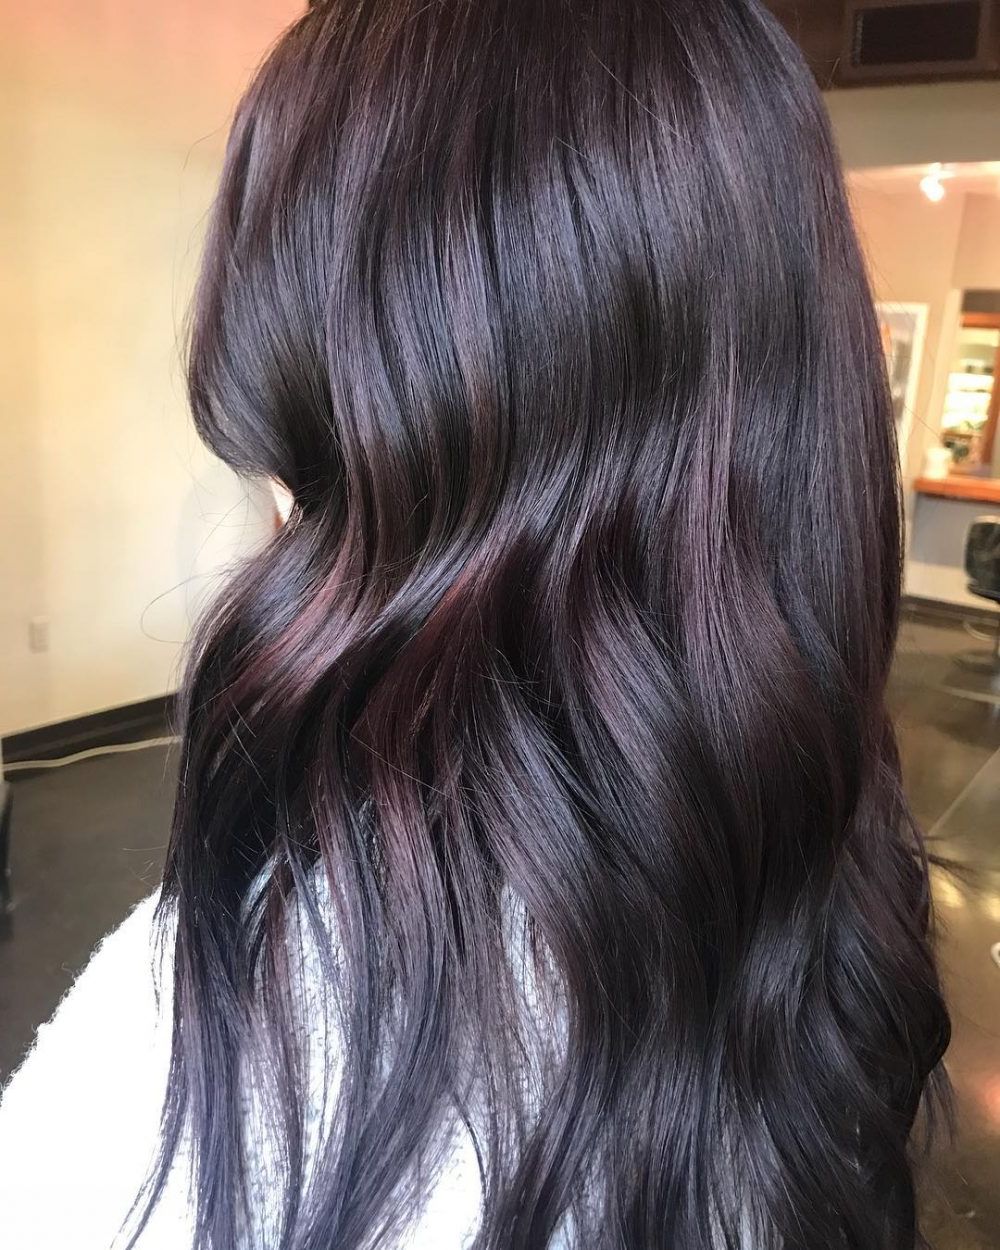 29 Flattering Dark Hair Colors For Every Skin Tone In 2018 In Disheveled Burgundy Brown Bob Hairstyles (Gallery 19 of 20)